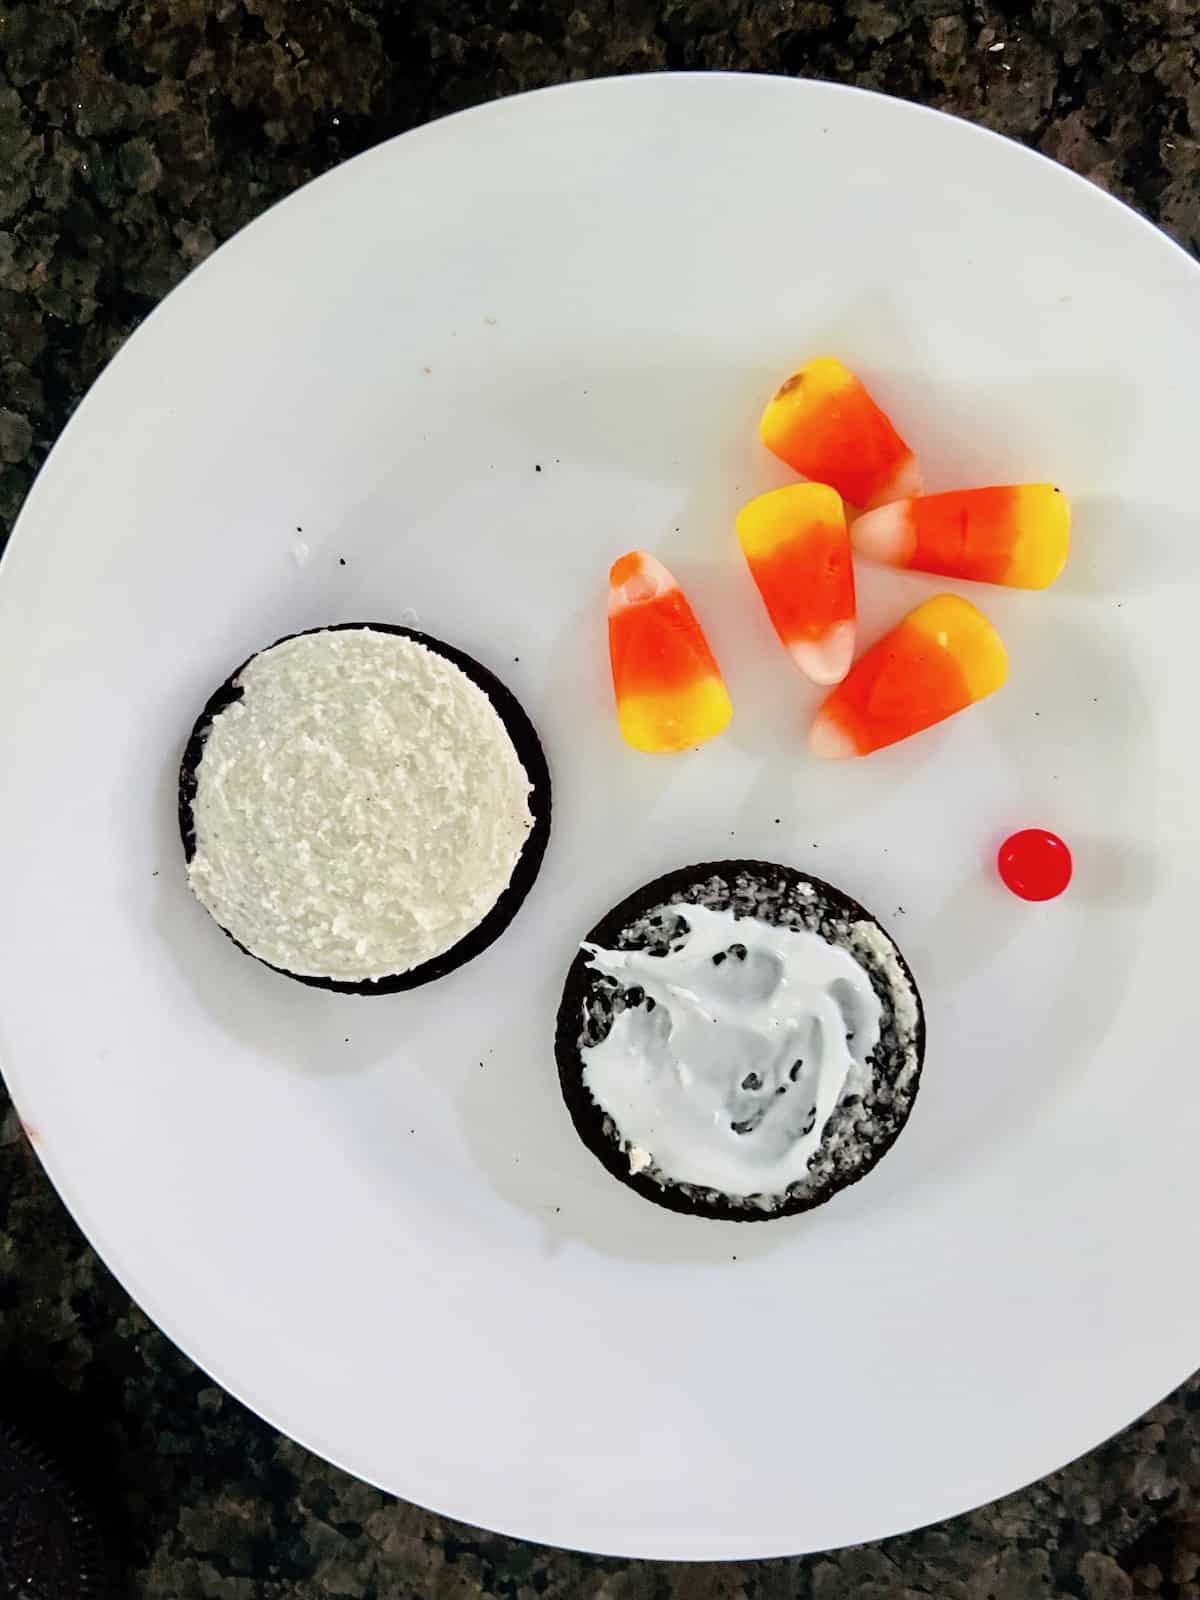 Opened Oreo on a plate with frosting candy corns and a red hot.